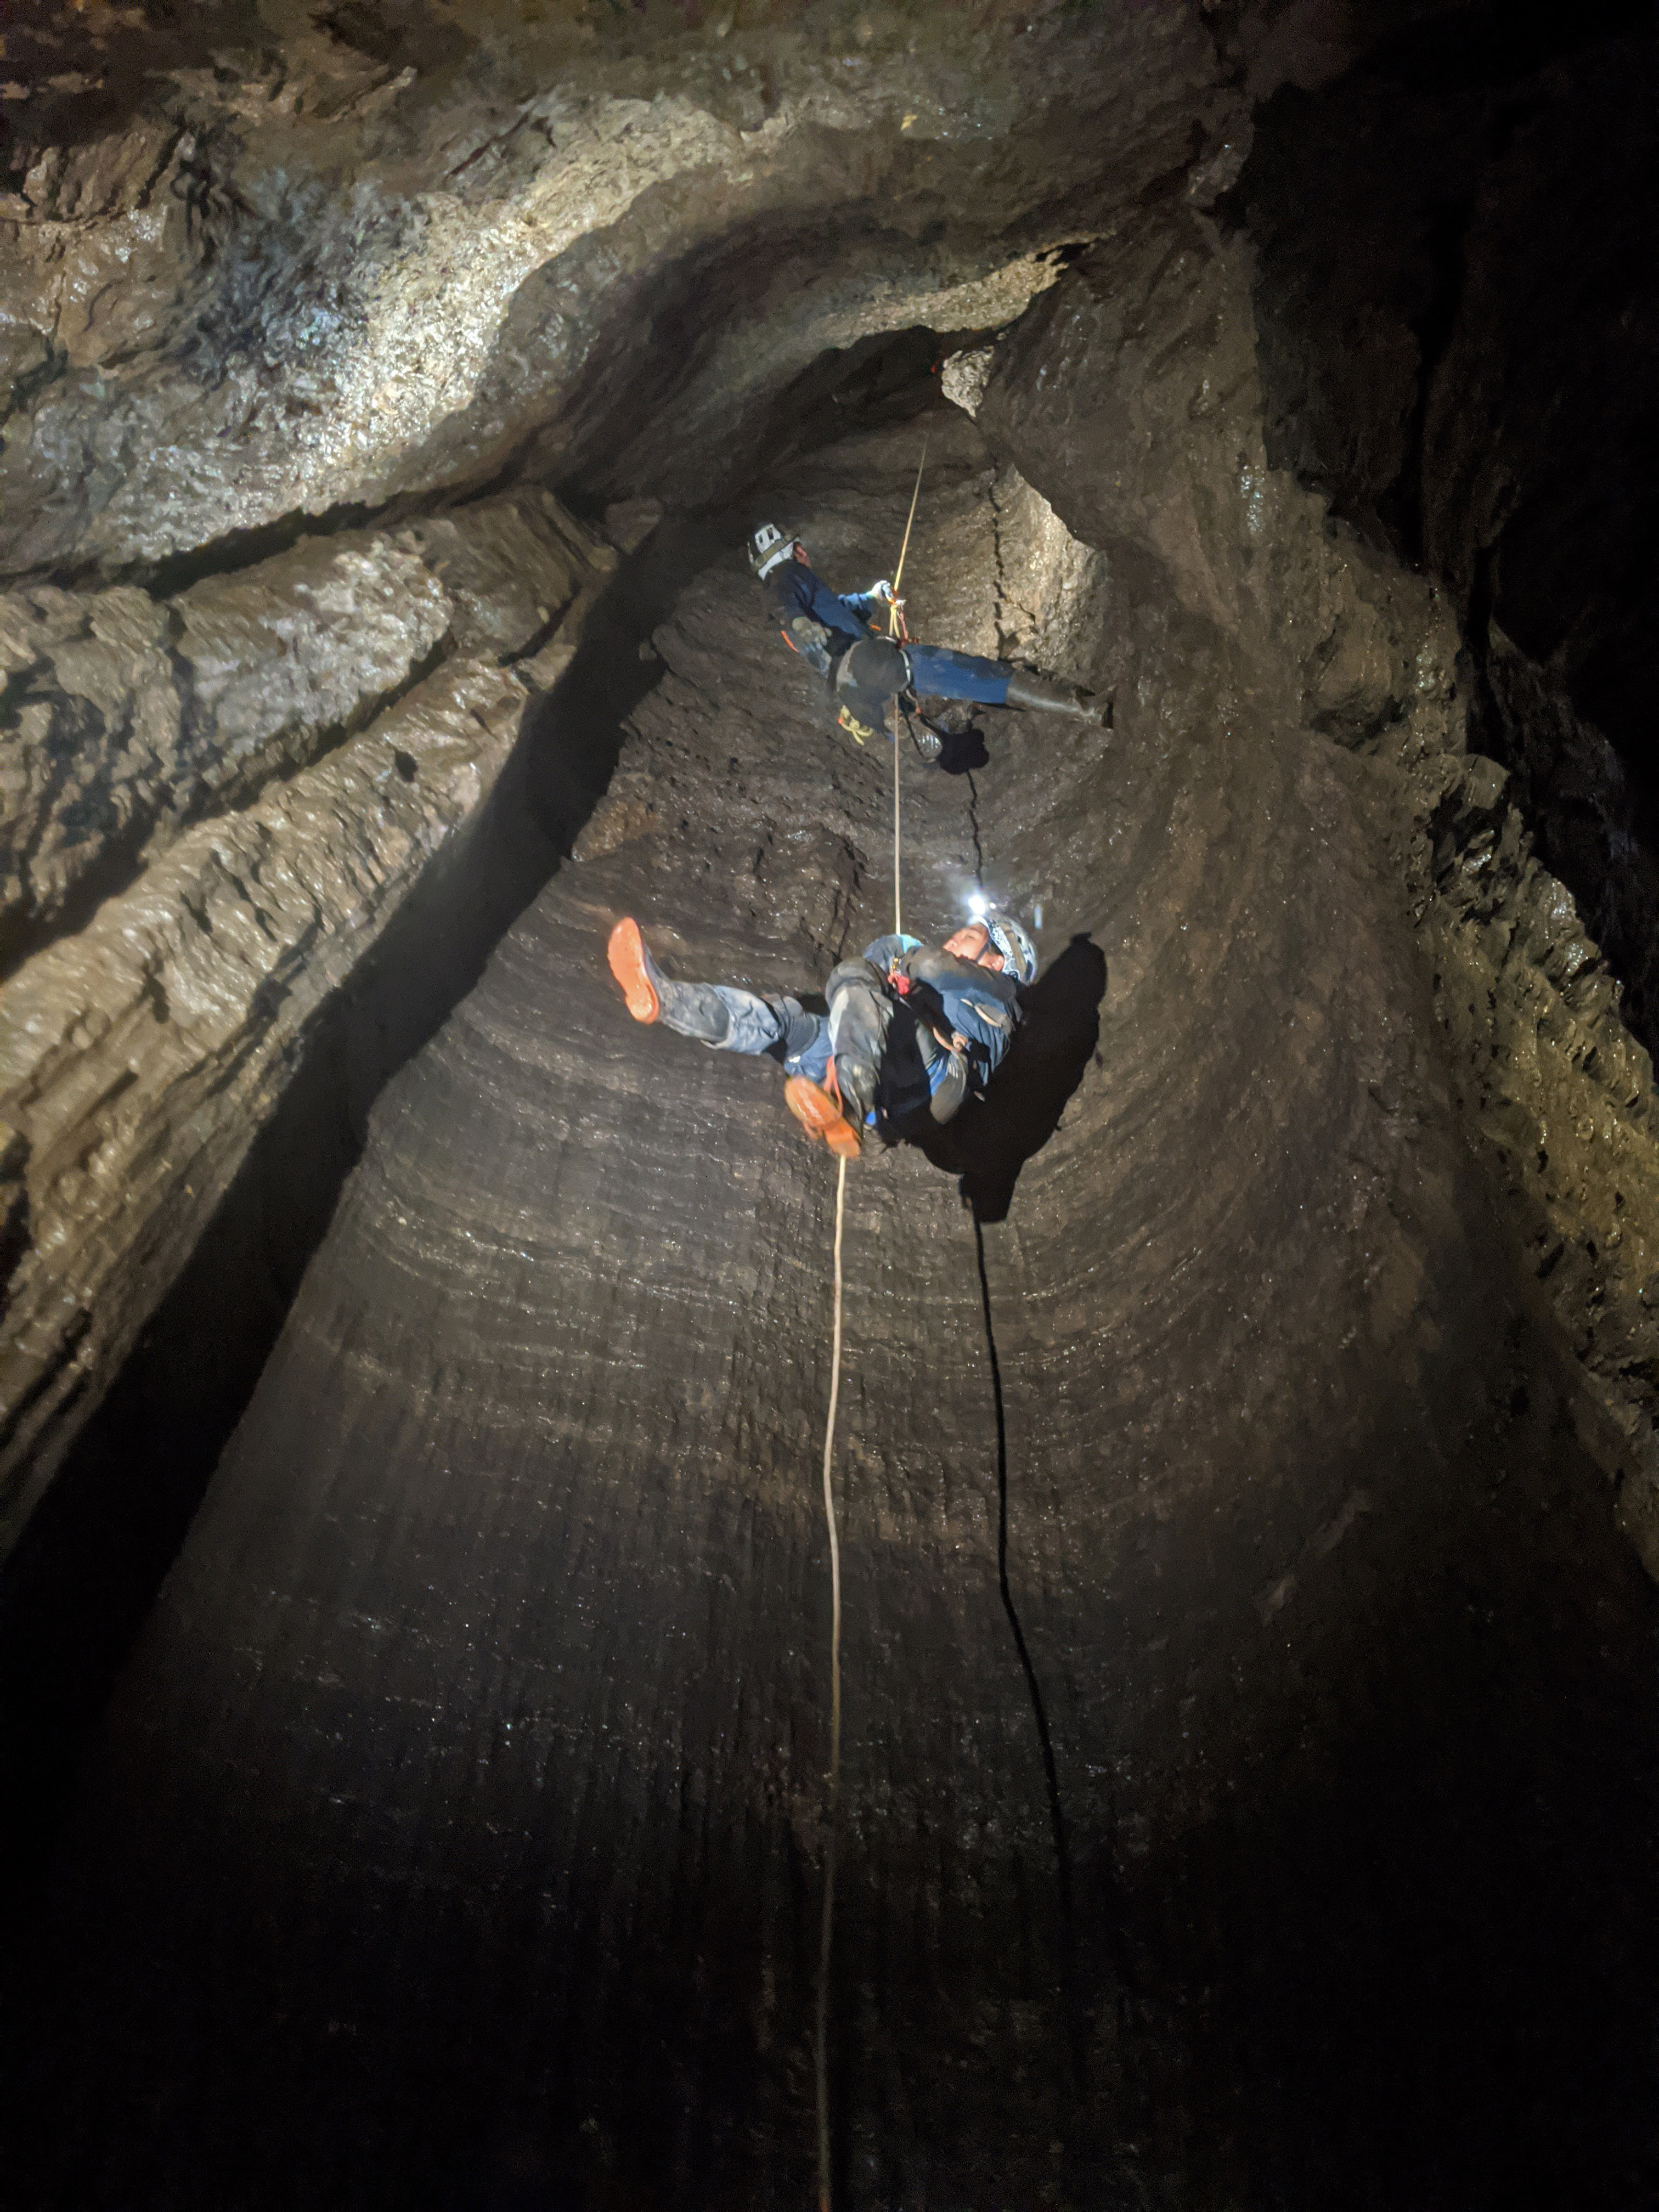 Cavers rappelling down a hole